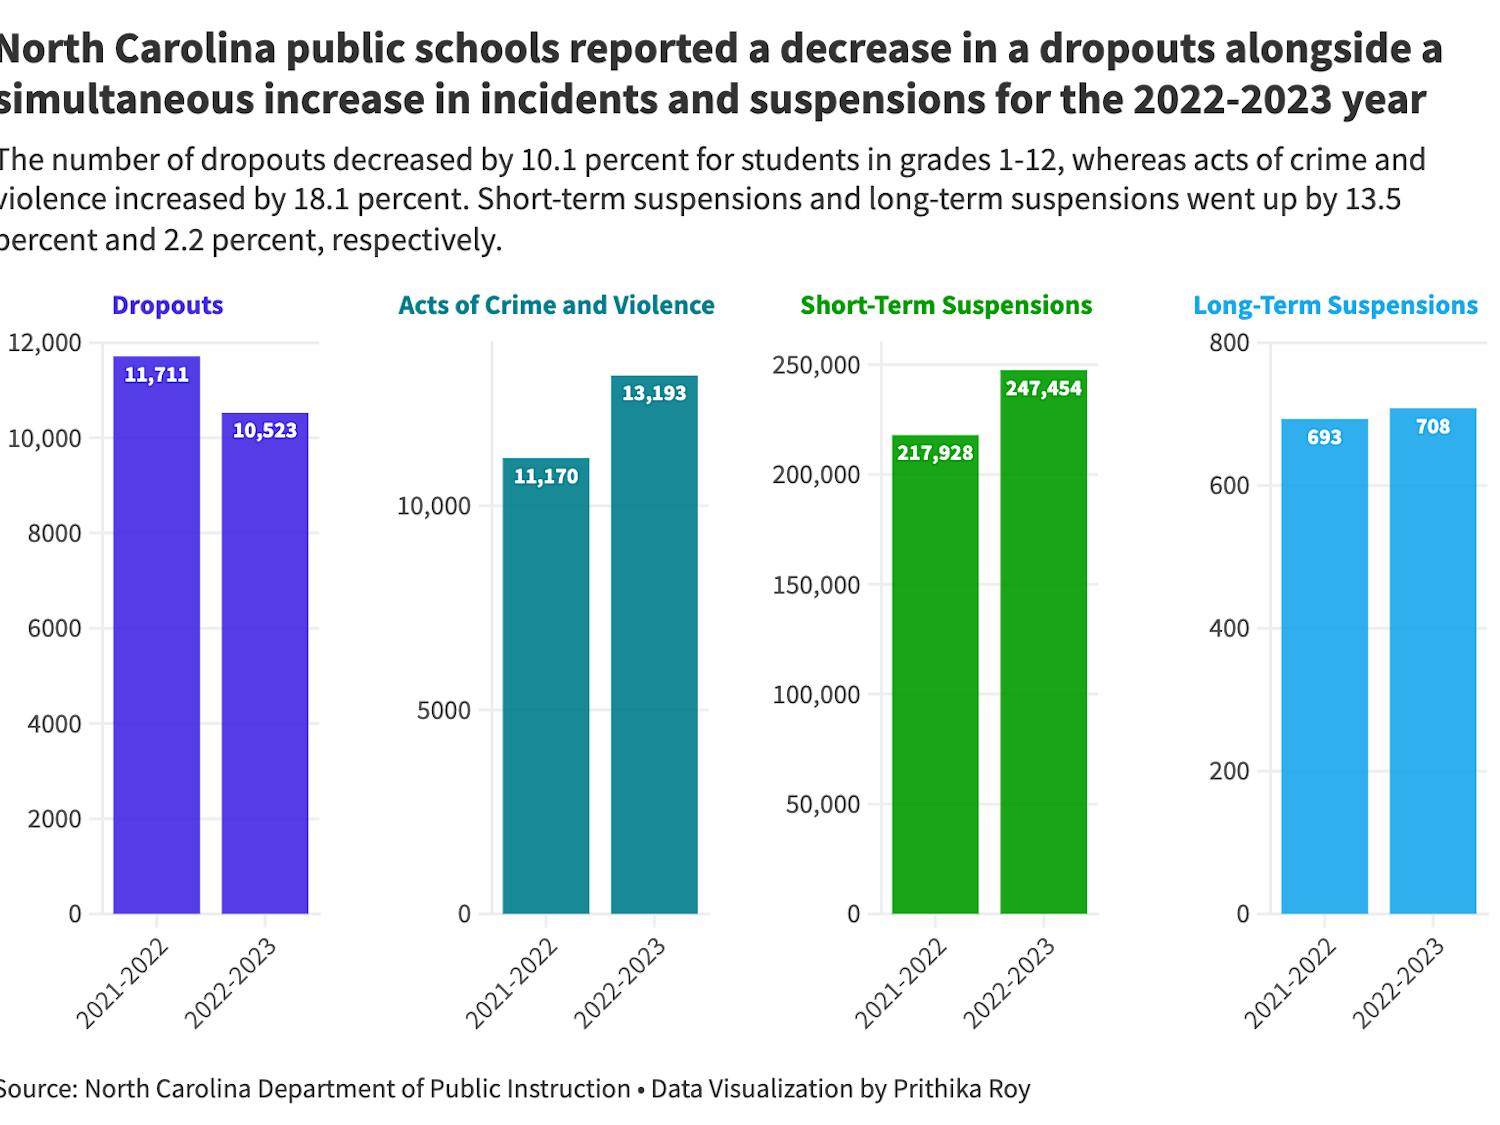 Visualization: N.C. public schools reported a decrease in a dropouts alongside a simultaneous increase in incidents and suspensions for the 2022-2023 year